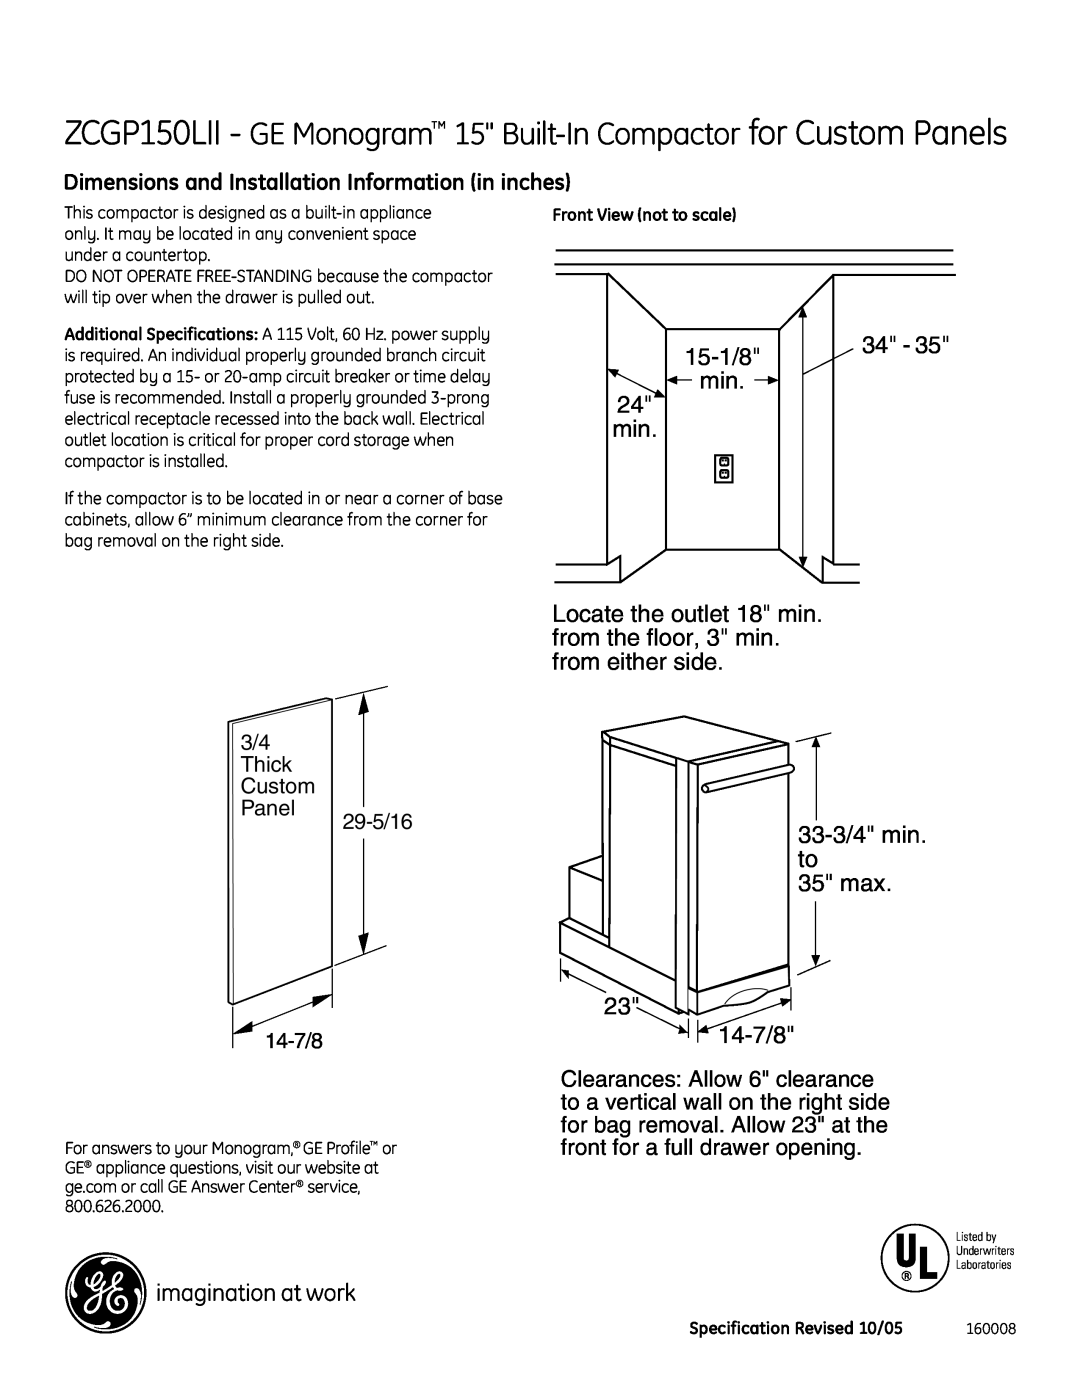 GE Monogram ZCGP150LII dimensions Dimensions and Installation Information in inches, 15-1/8, 24 min, 33-3/4 min, 35 max 